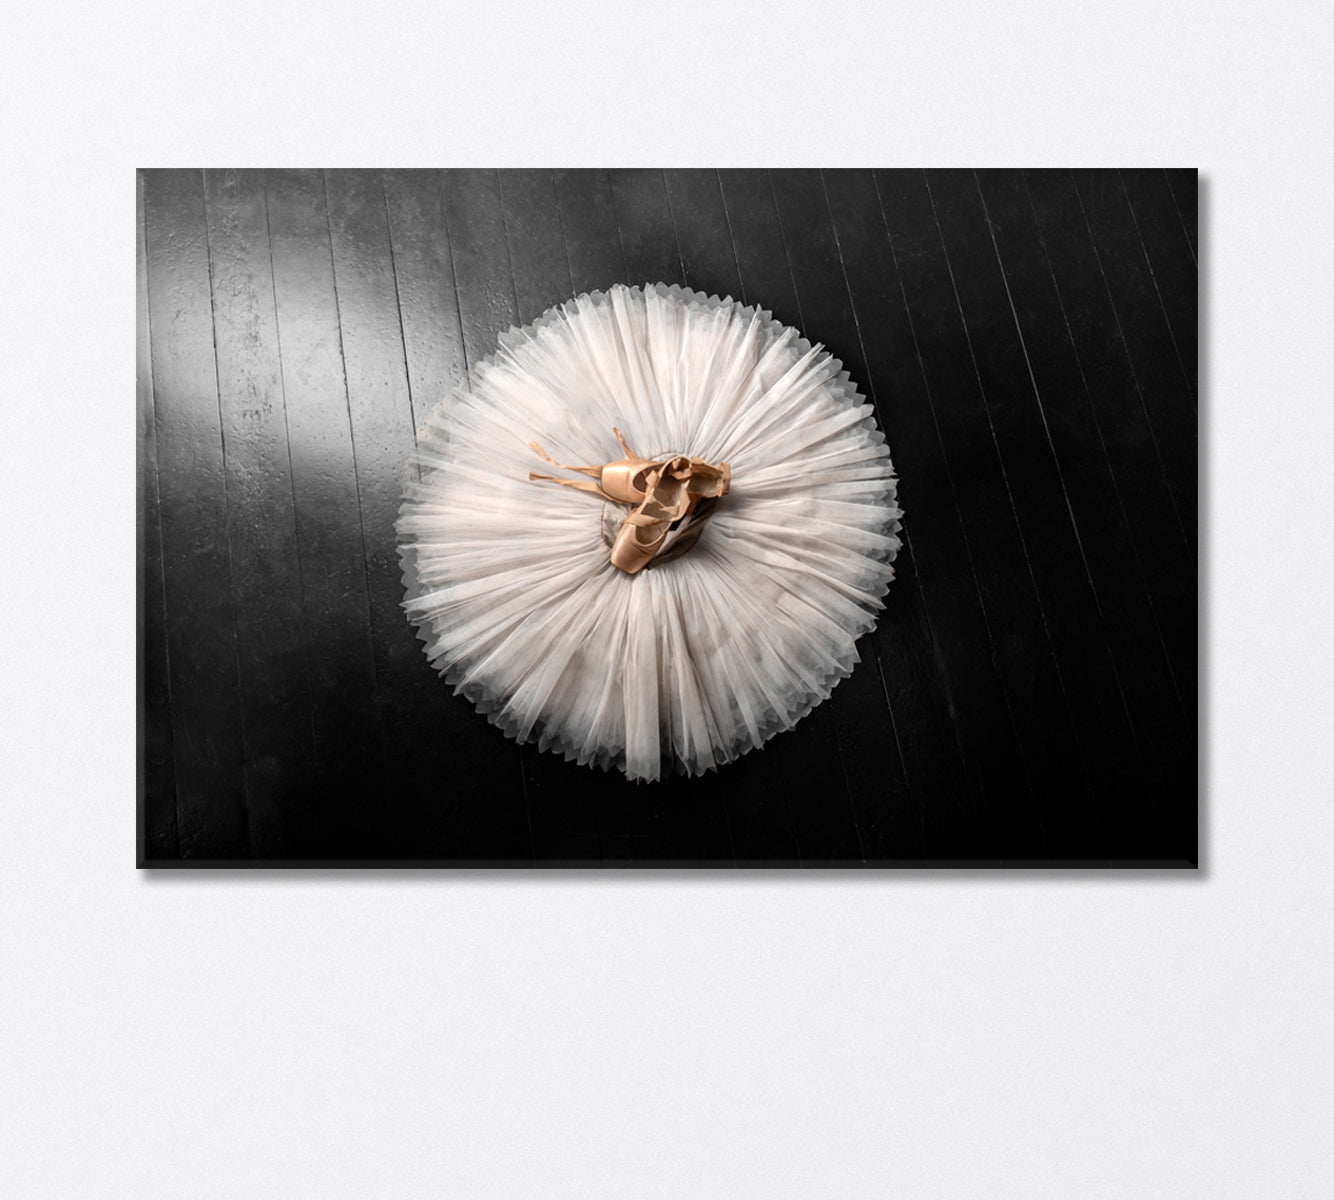 Professional Ballerina Outfit Pointe Shoes and Tutu Canvas Print-Canvas Print-CetArt-1 Panel-24x16 inches-CetArt